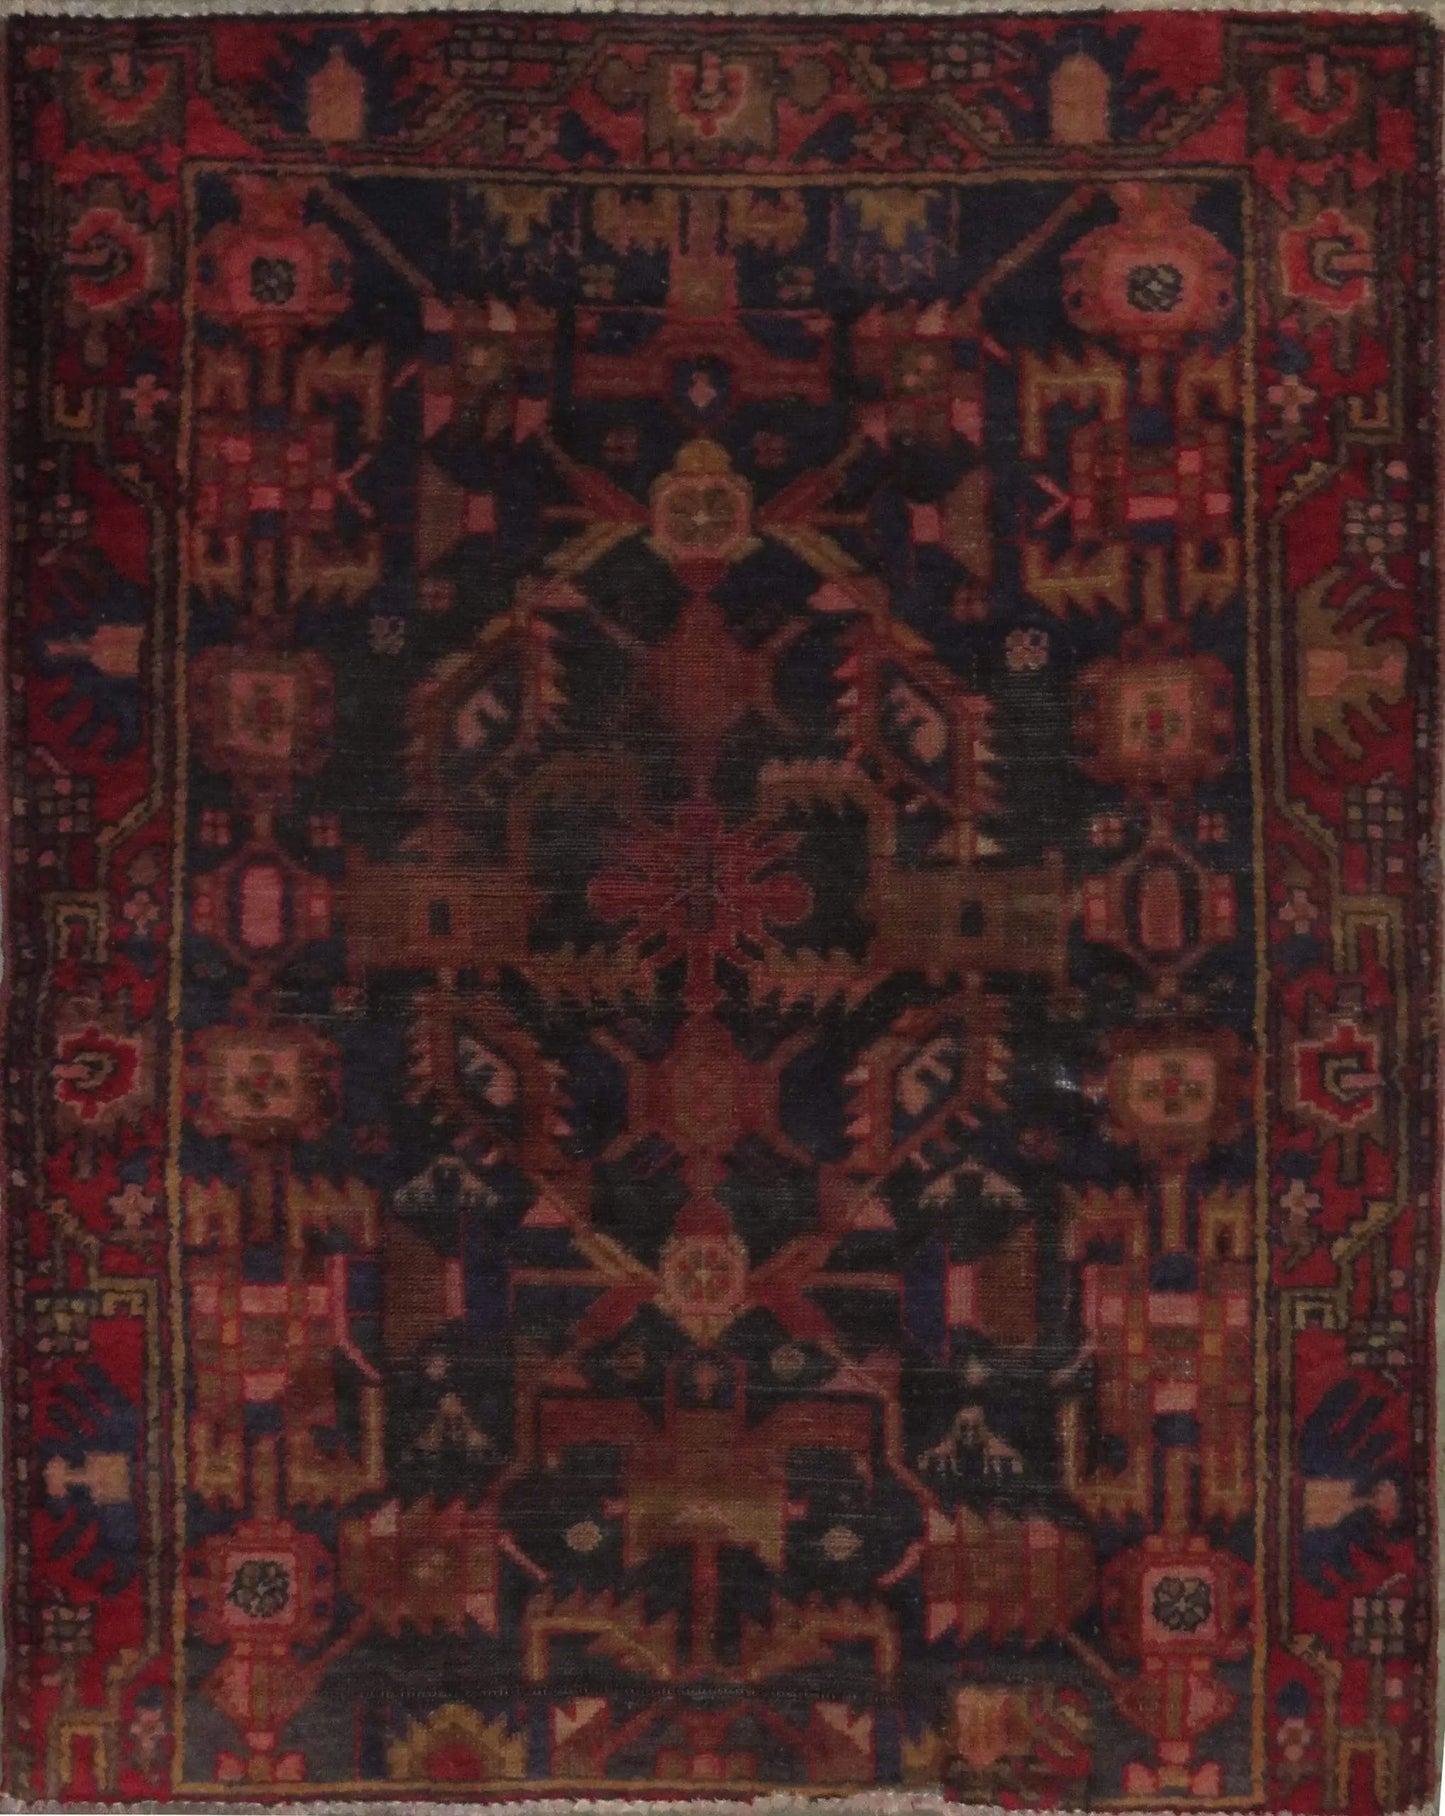 Hand-Knotted Vintage Rug 4'4" x 3'6"